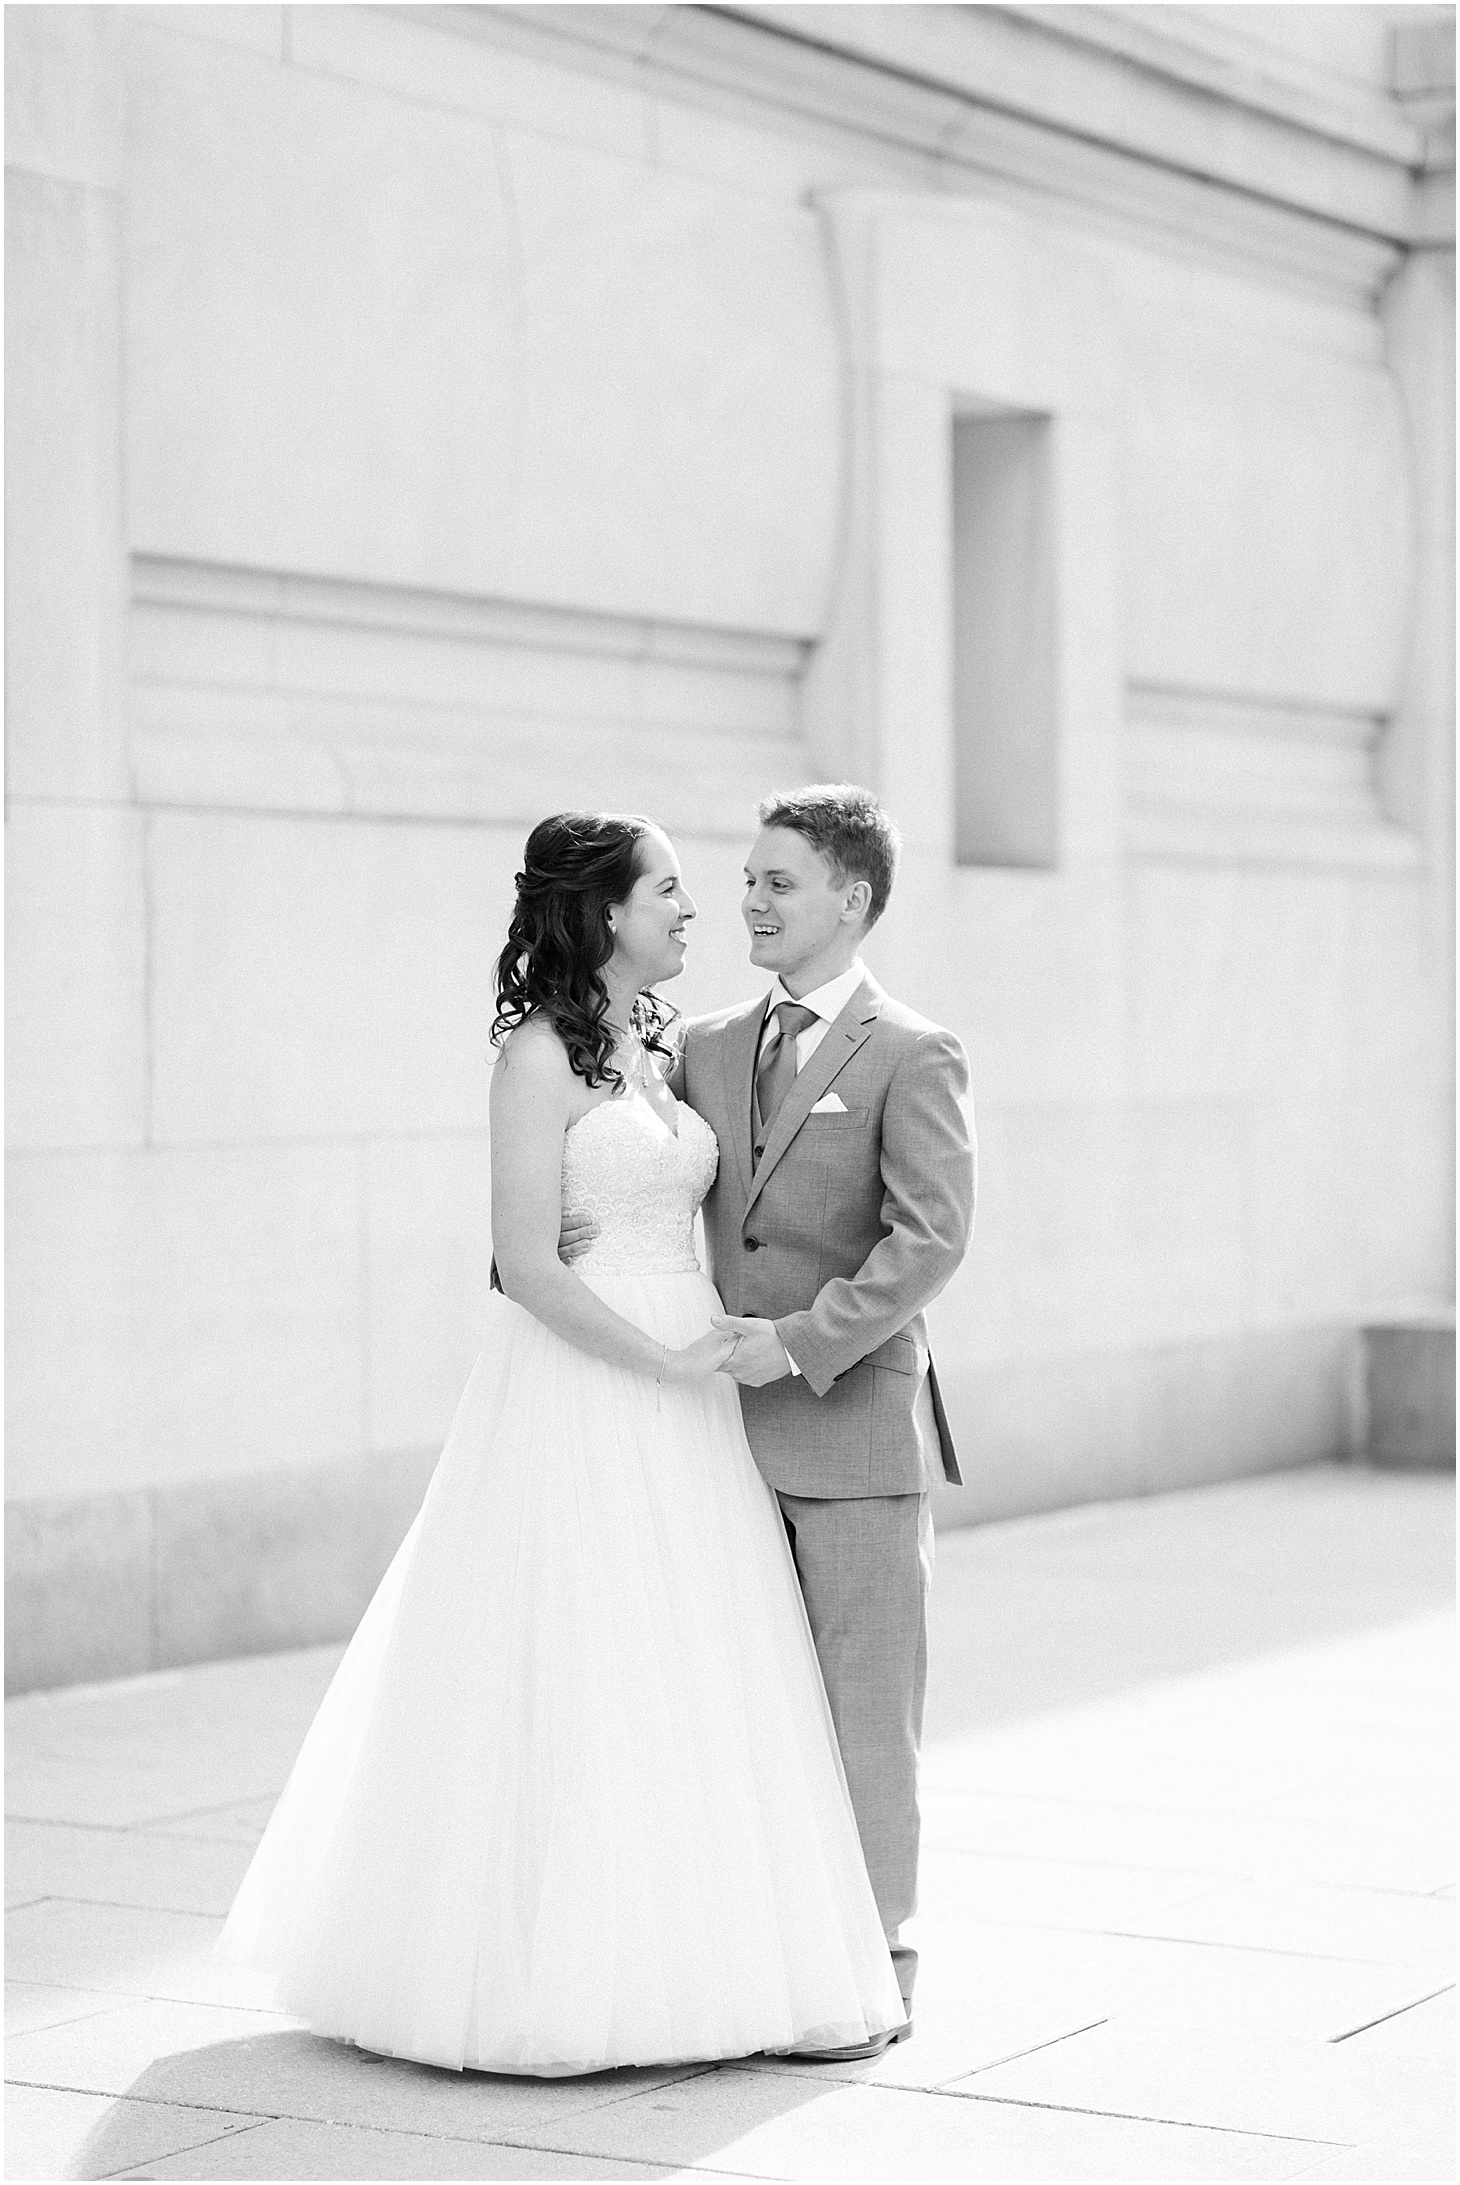 Wedding Portraits at National Museum of Women in the Arts, Kimpton Donovan Hotel, Dusty Blue and Pink Jewish Wedding at Women in the Arts, Sarah Bradshaw Photography, DC Wedding Photographer 